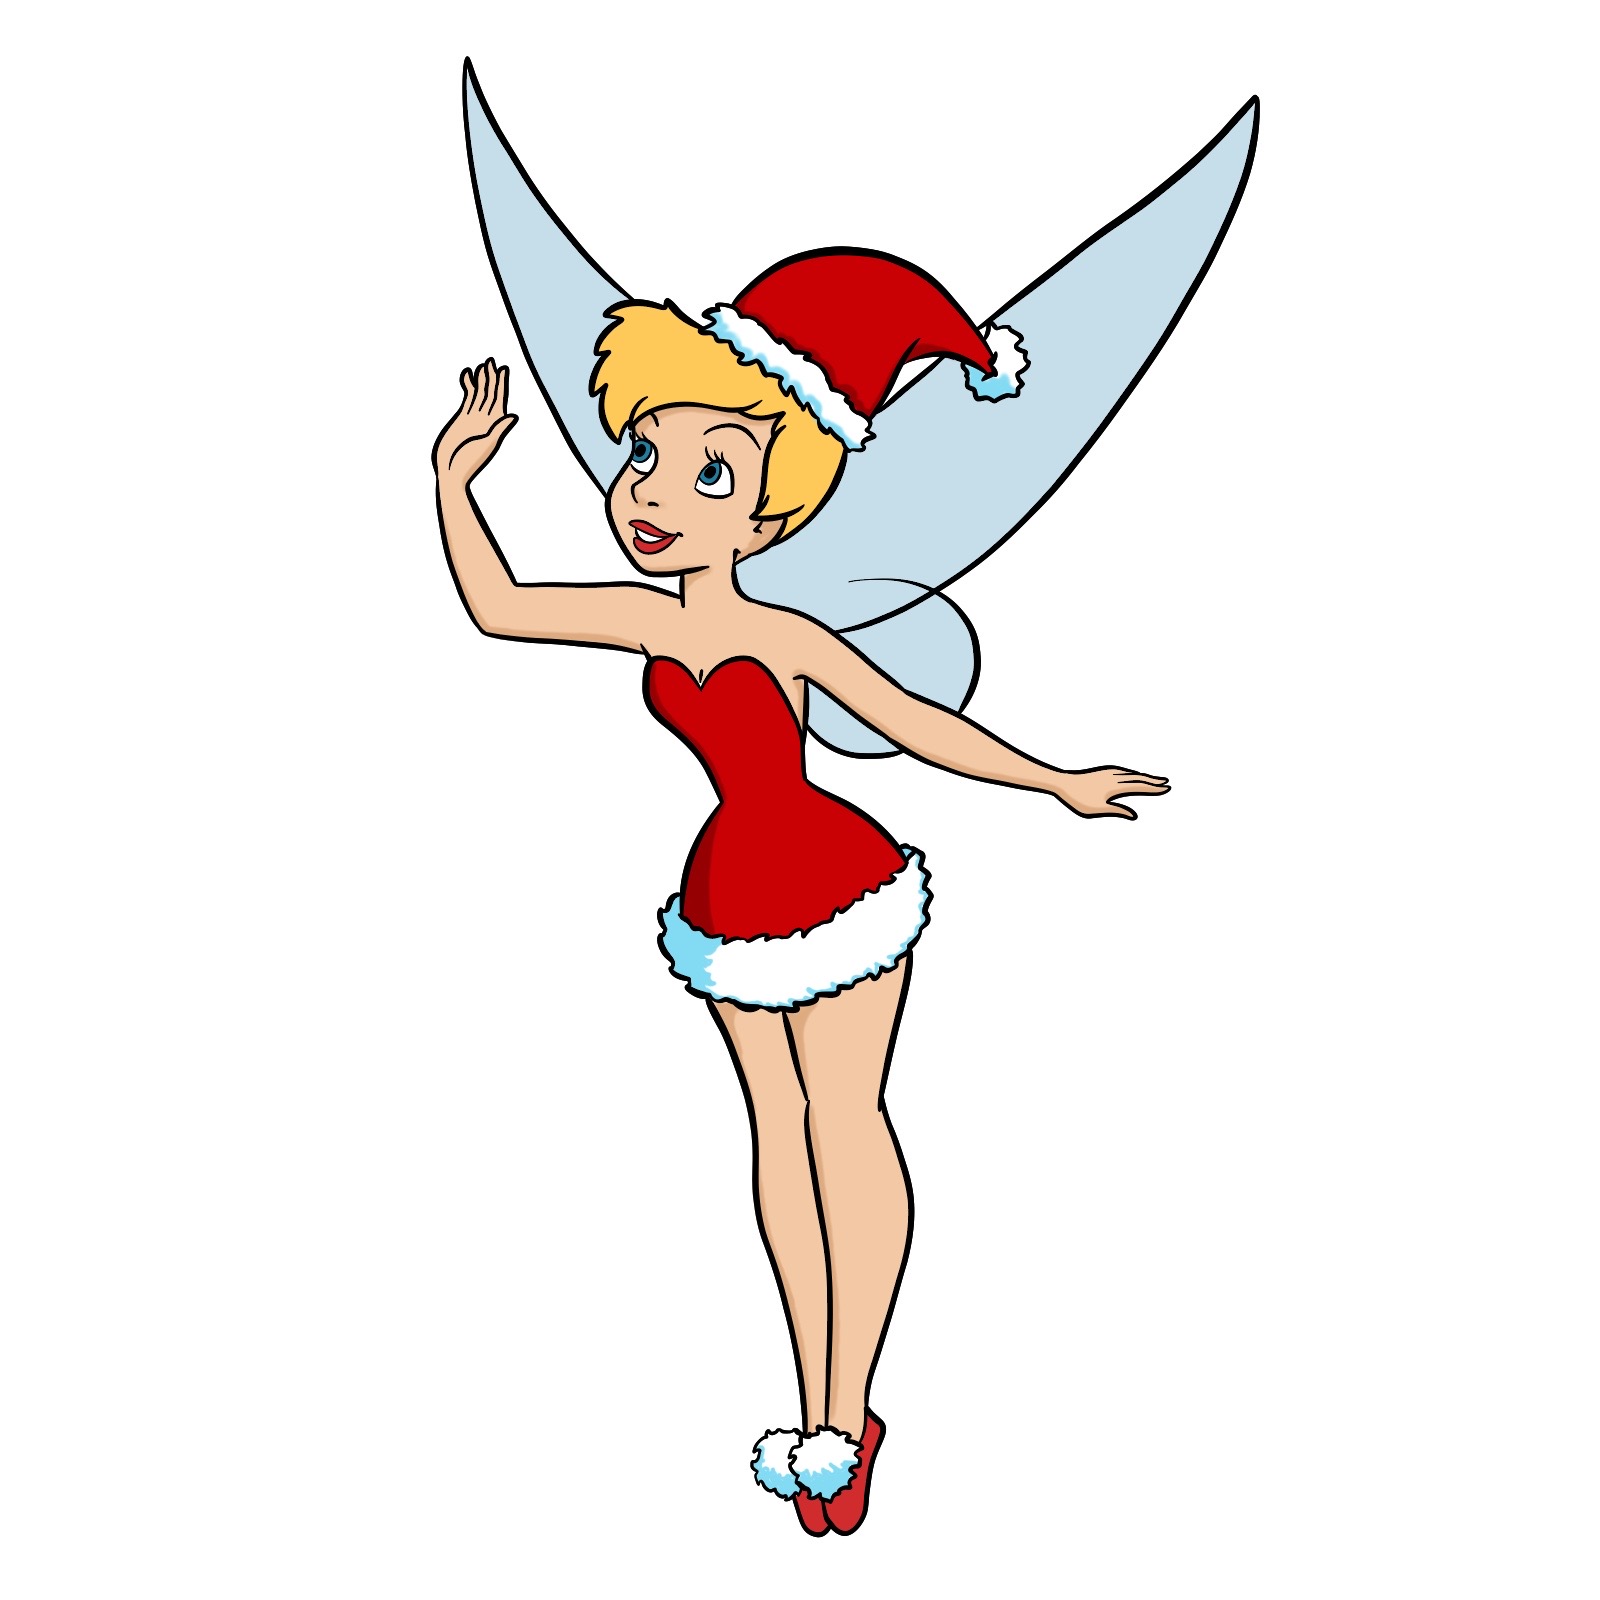 How to draw Tinker Bell in a Christmas costume - final step